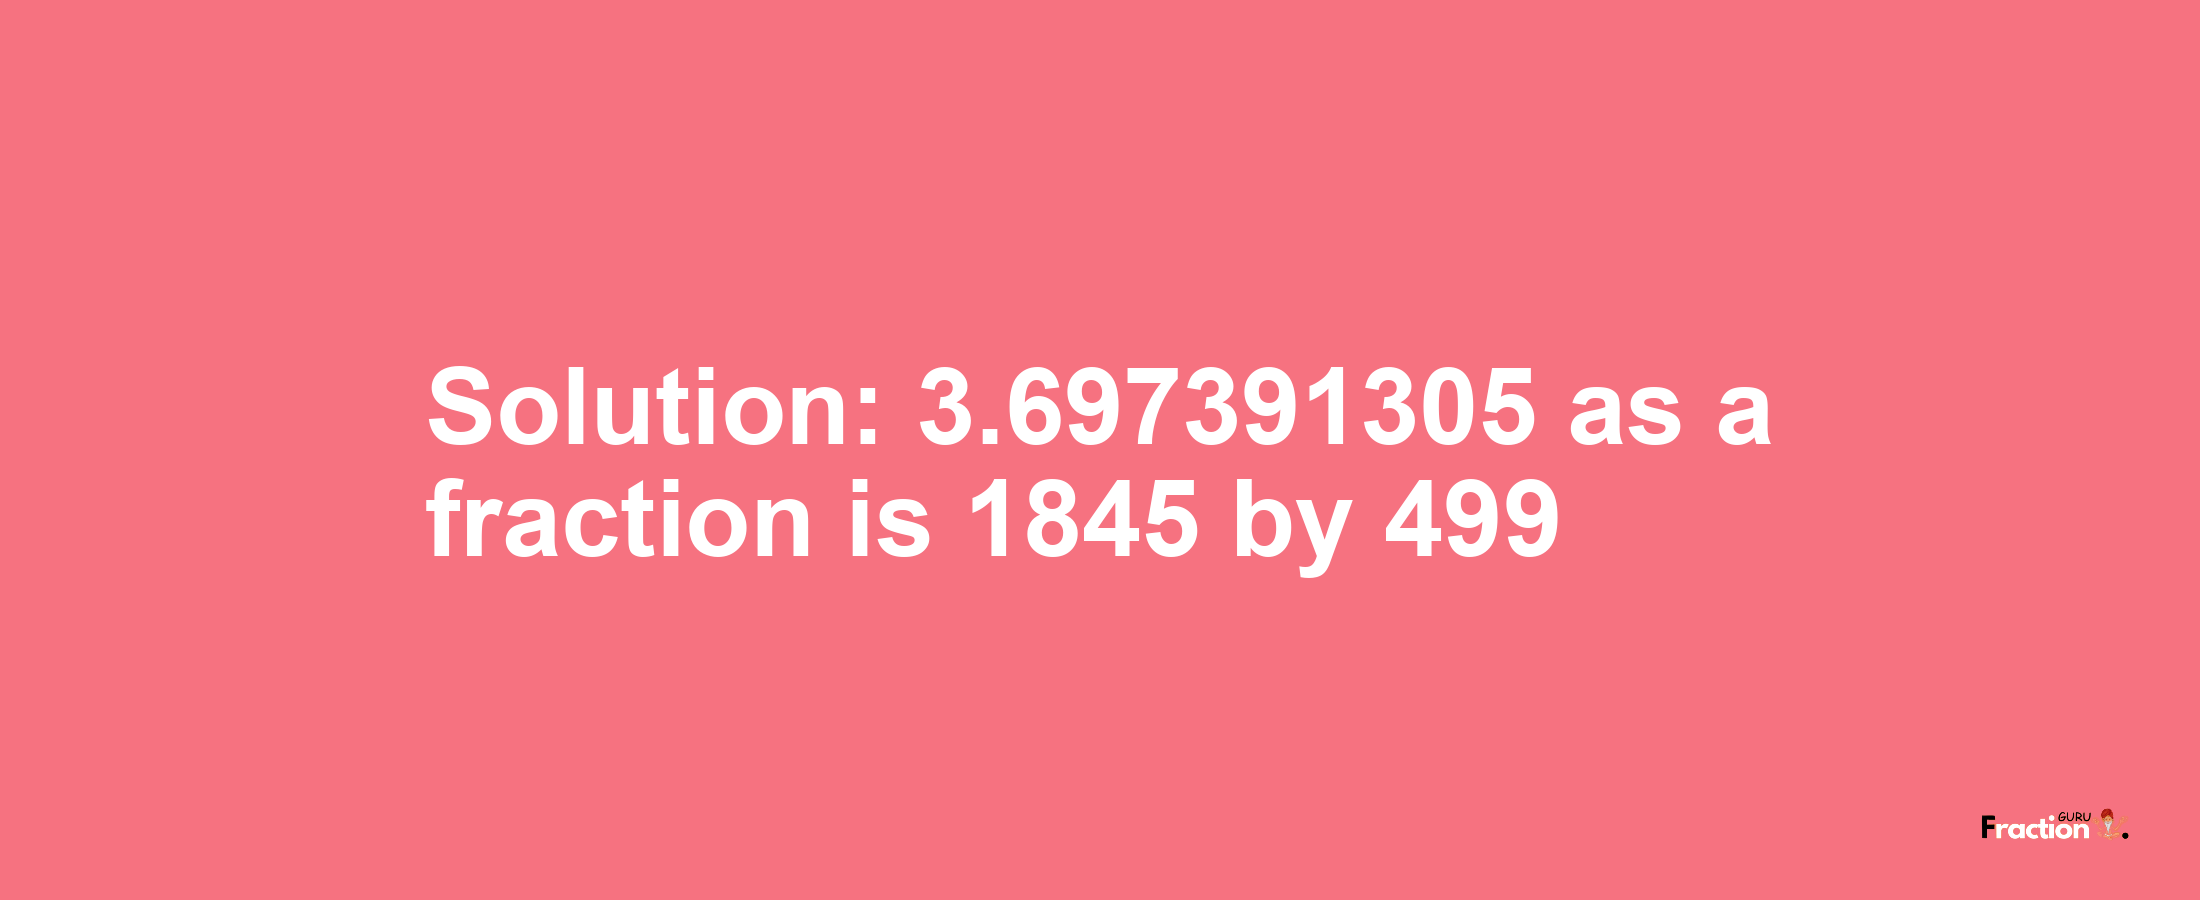 Solution:3.697391305 as a fraction is 1845/499